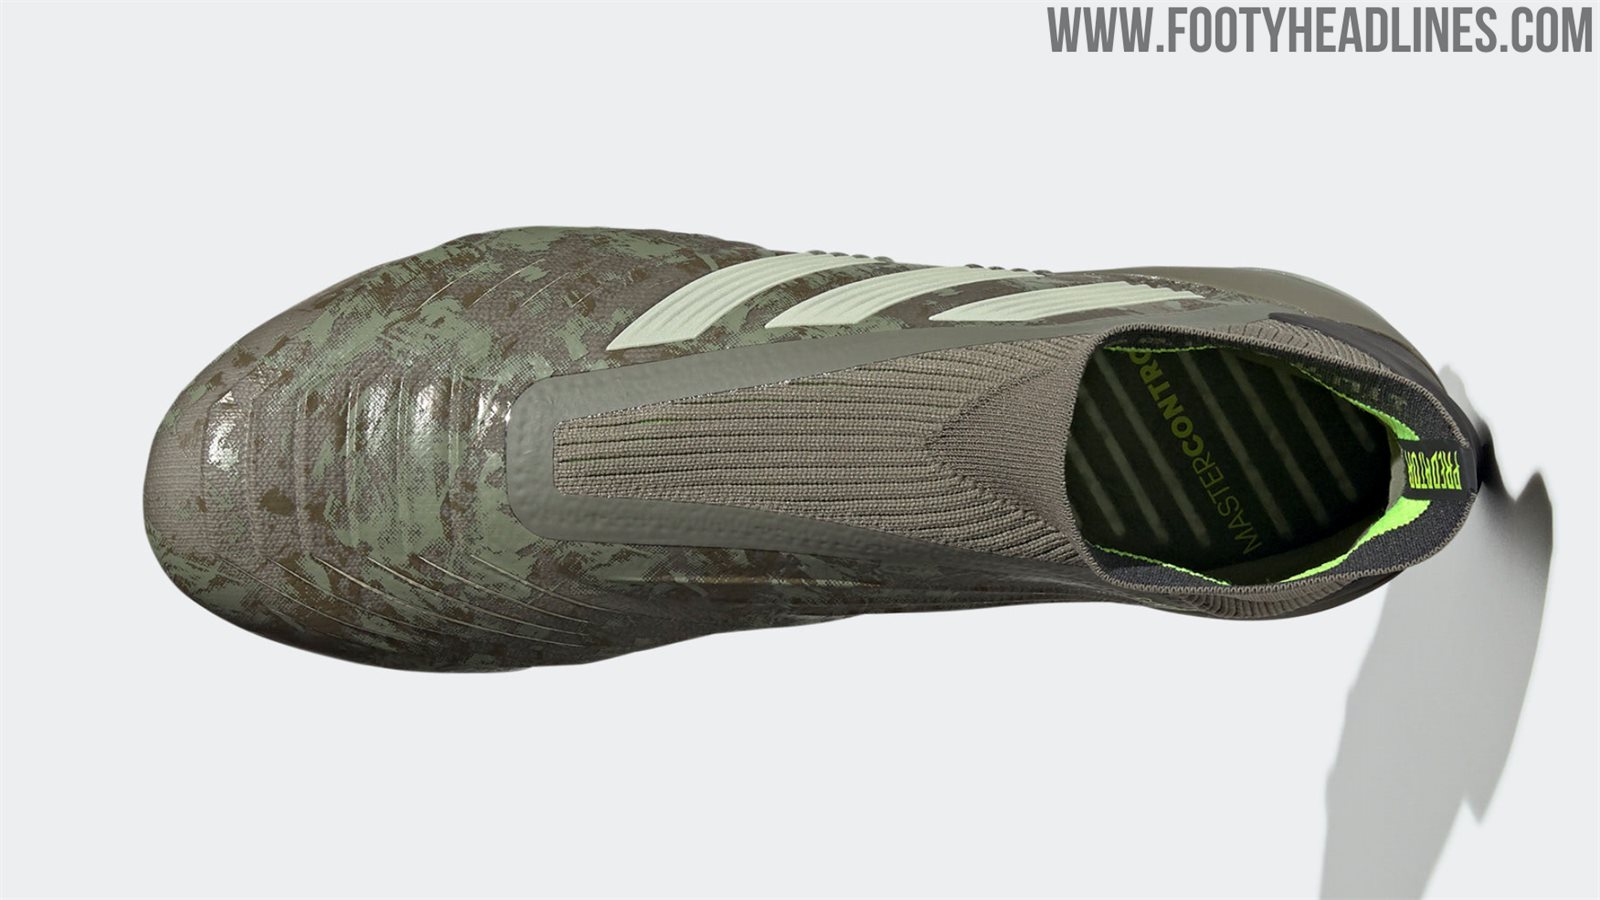 Adidas Encryption Pack Released | Camouflage Designs Including Next-Gen ...